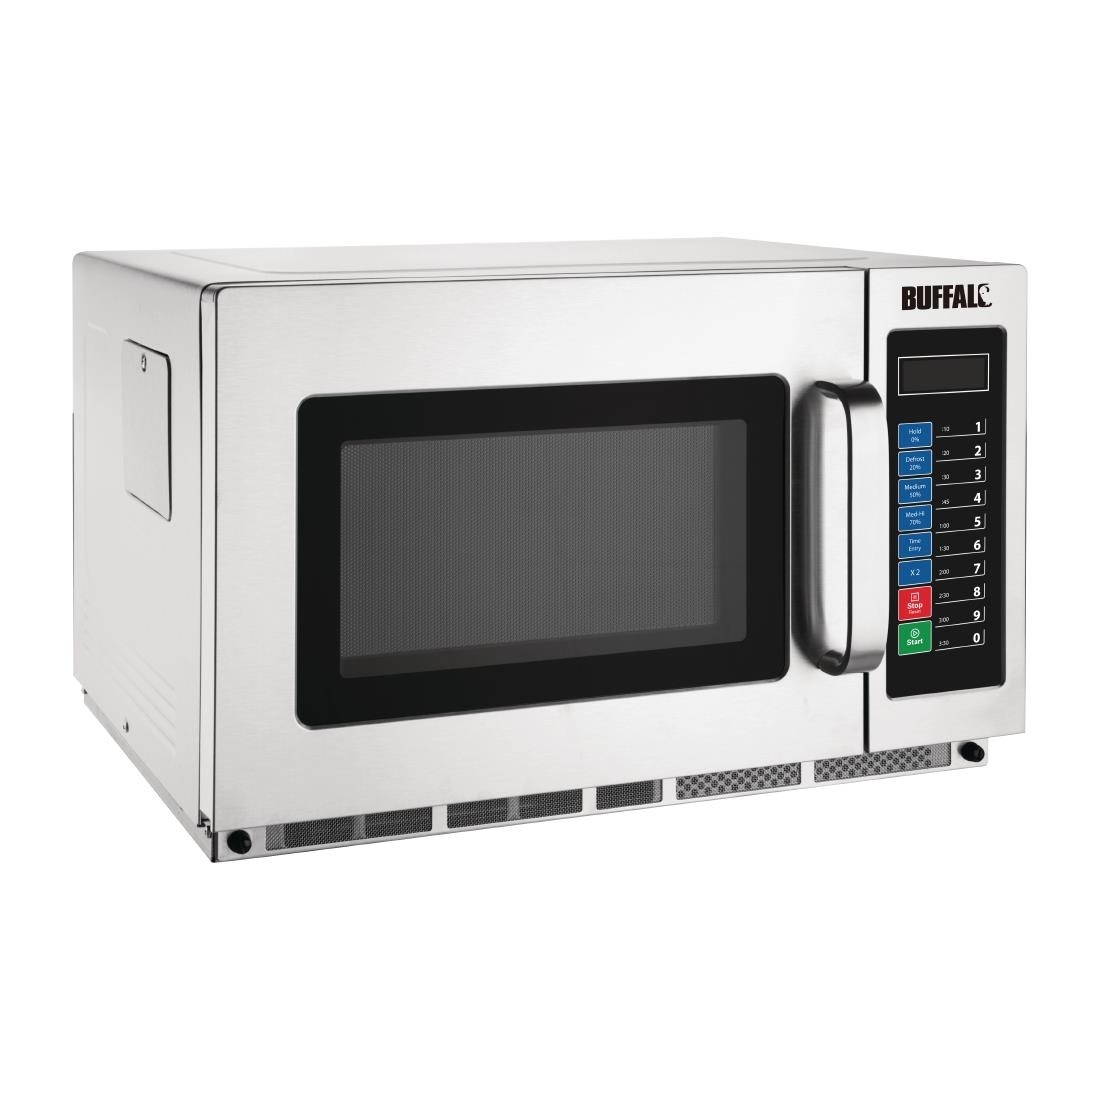 Buffalo Programmable Commercial Microwave Oven 1800W (FB864)